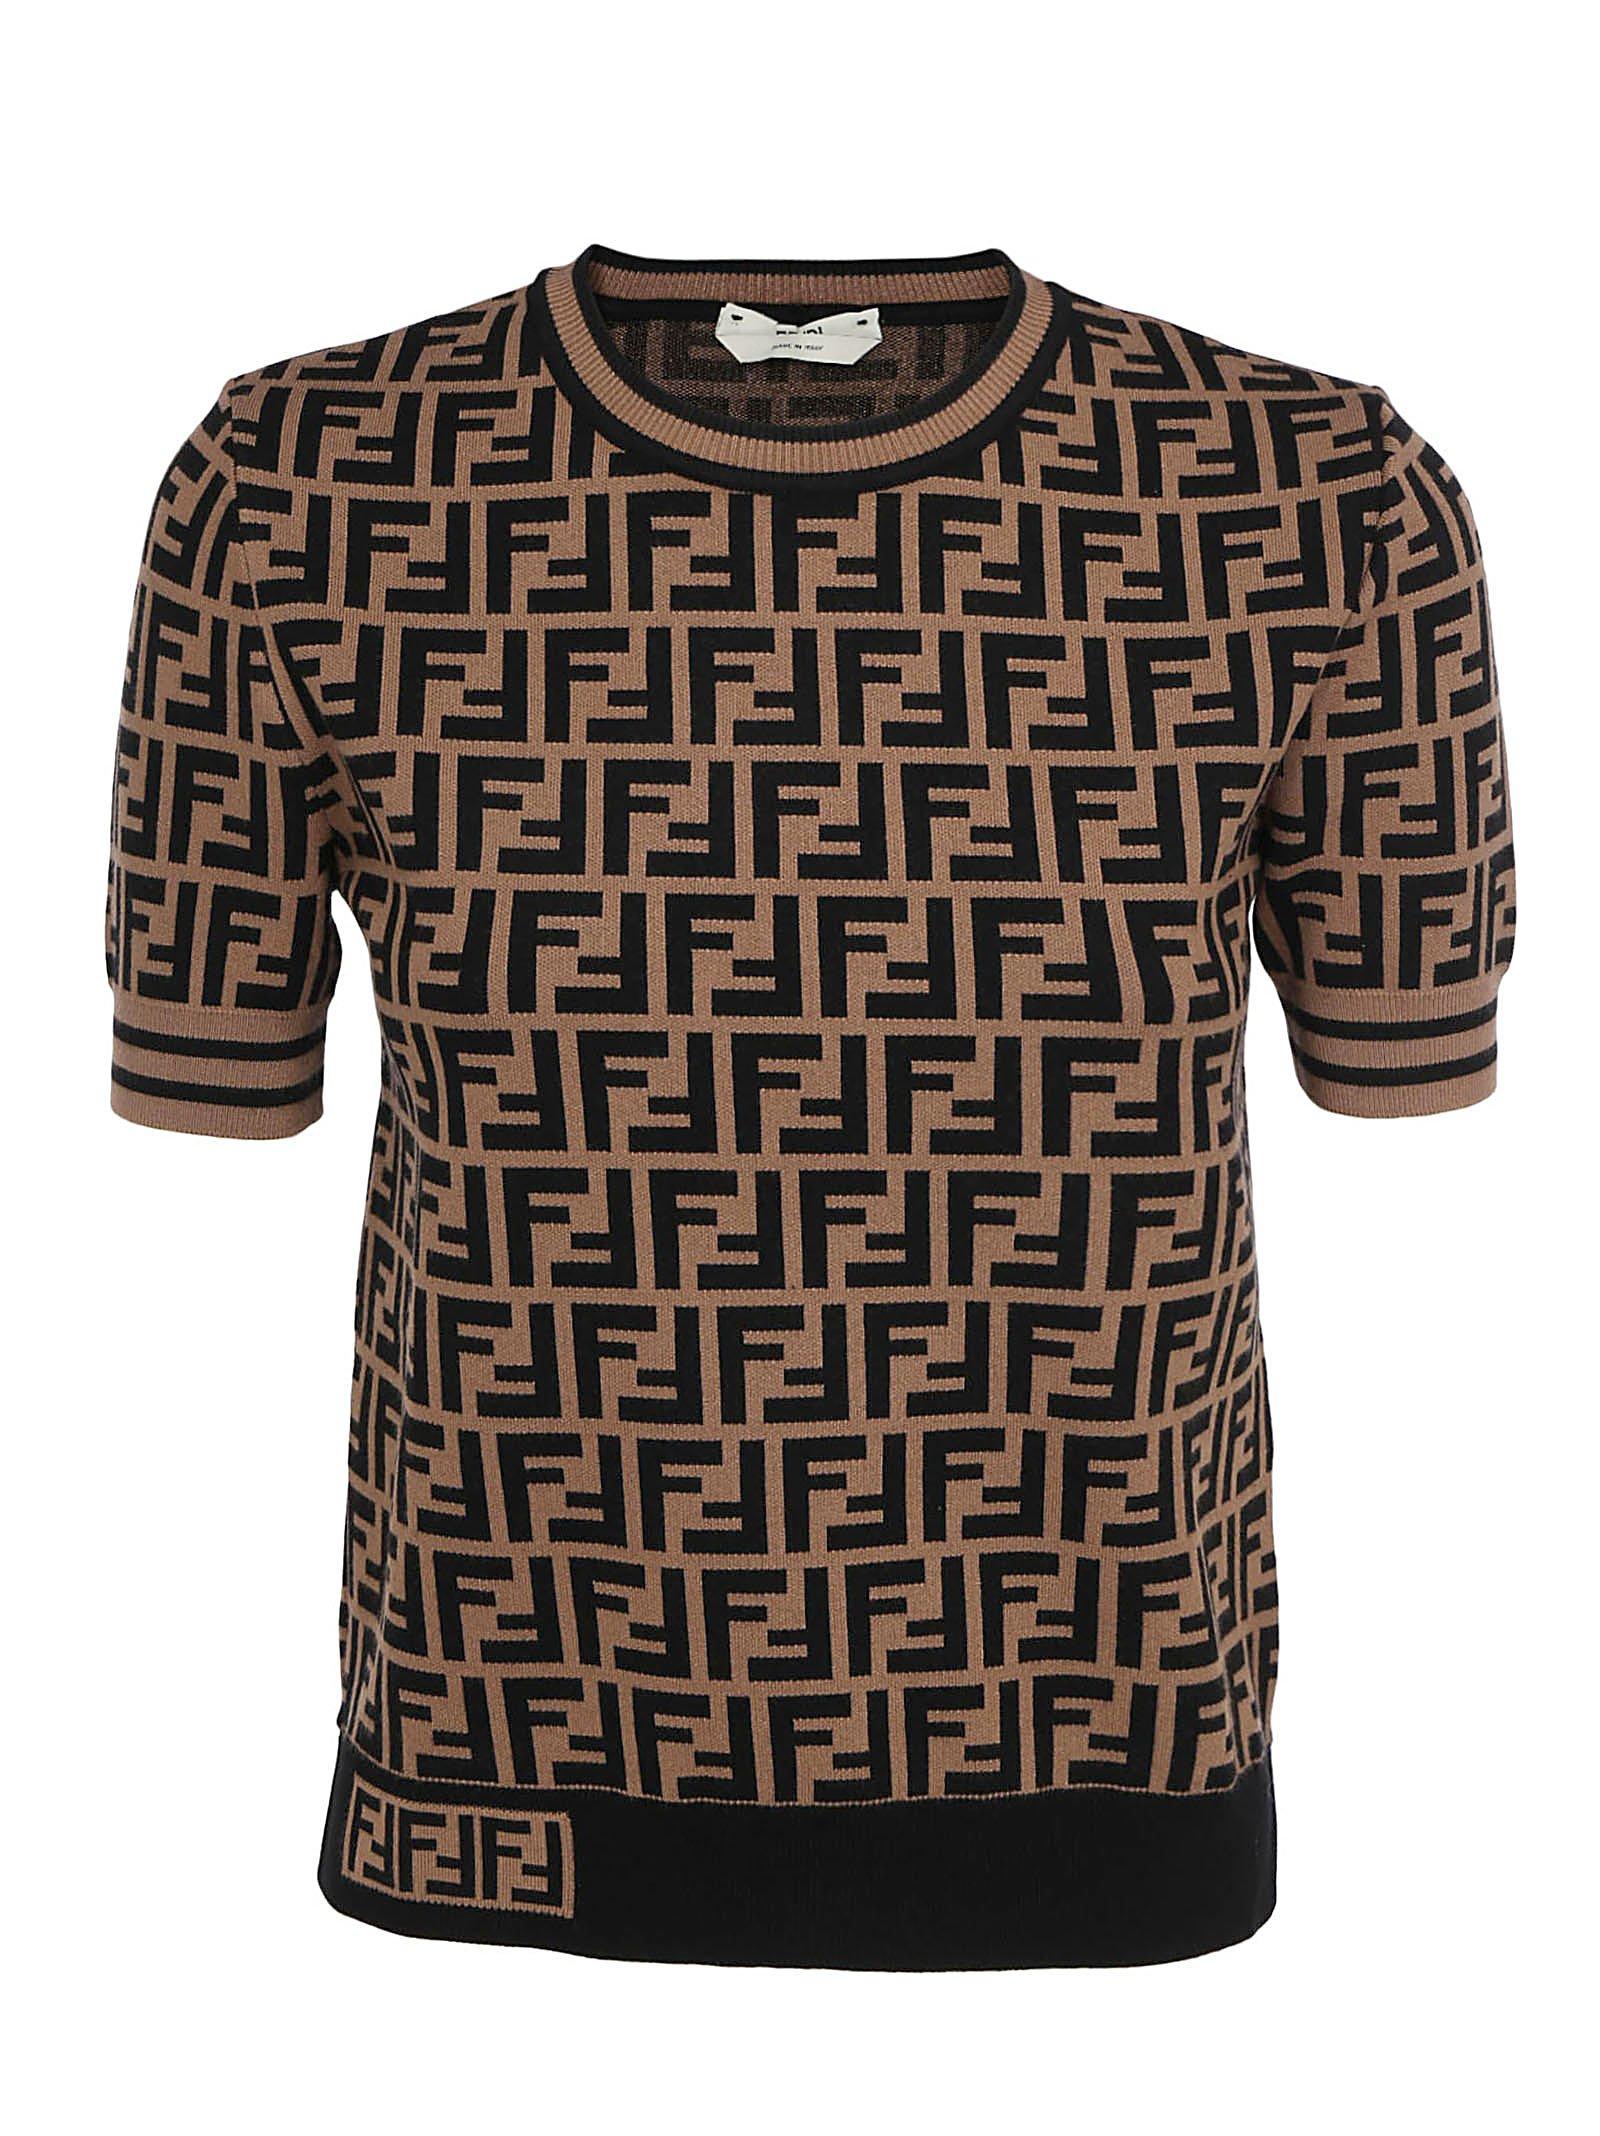 Fendi Synthetic Ff Motif Knitted Top in Brown - Lyst